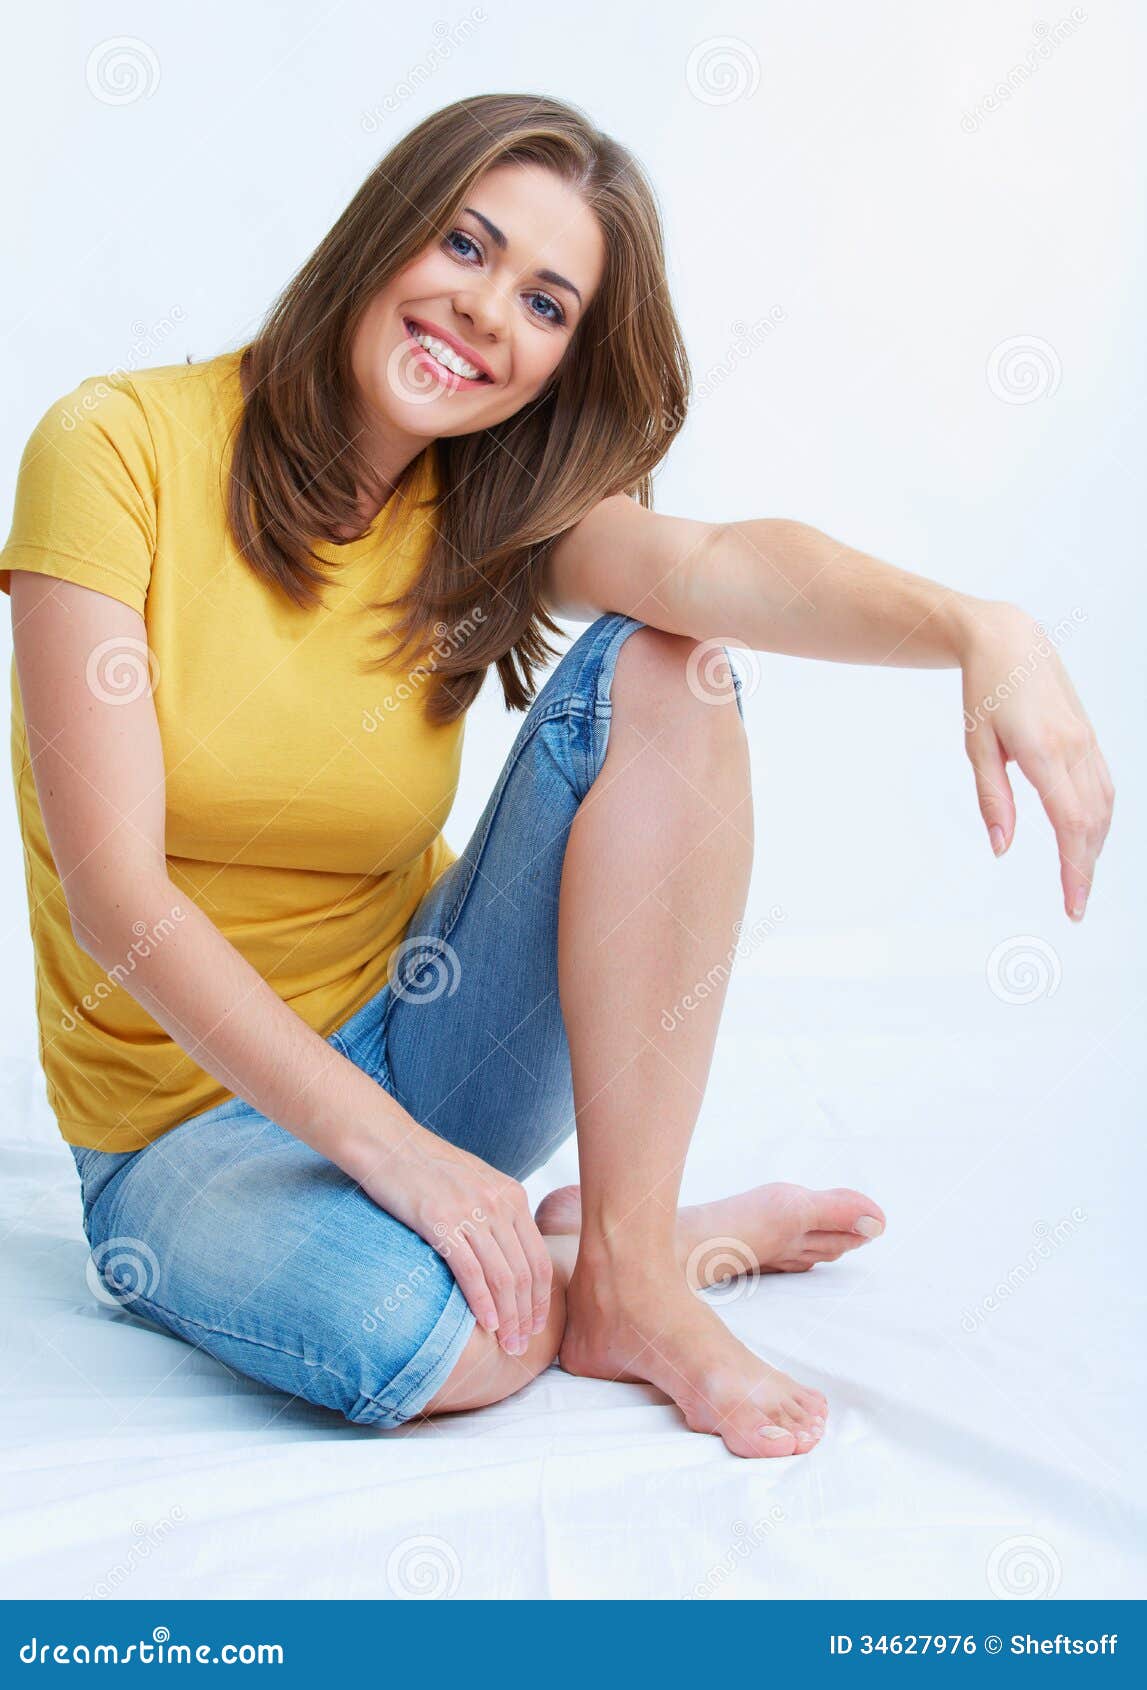 Portrait Of Smiling Young Woman Seating On Floor Stock Photo - Image of ...